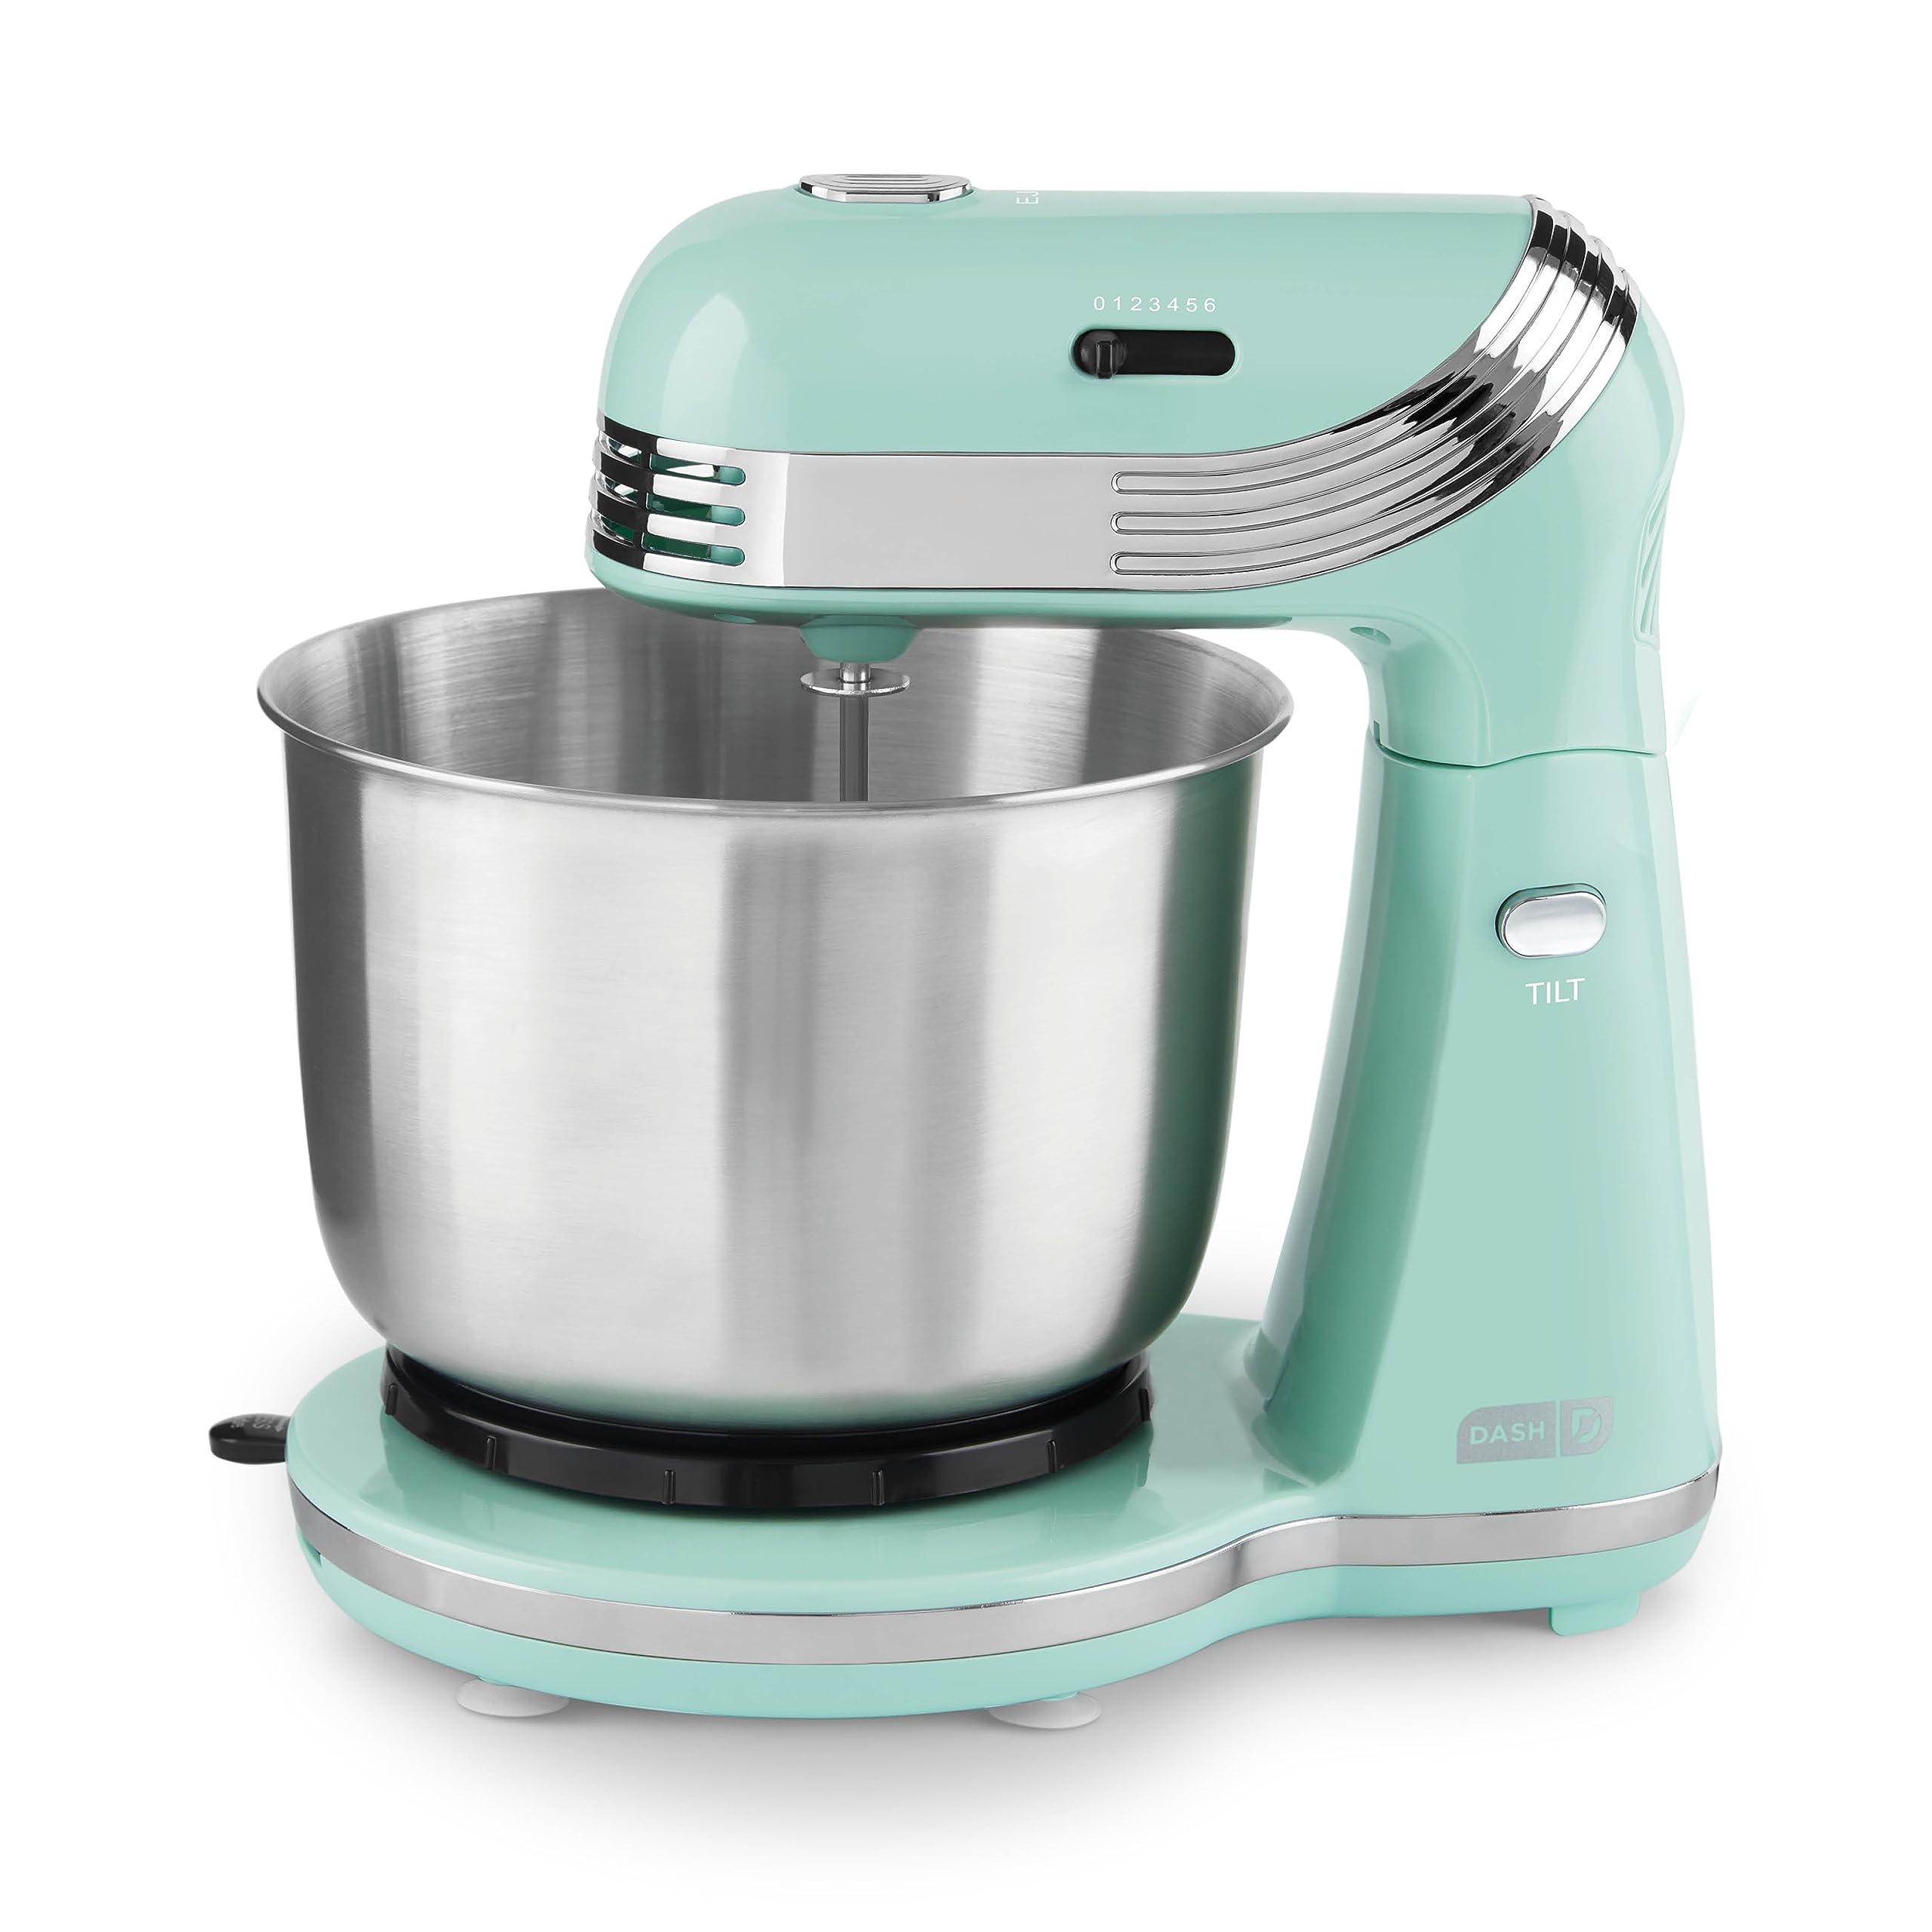 DASH Everyday Stand Mixer, Silver on Galleon Philippines